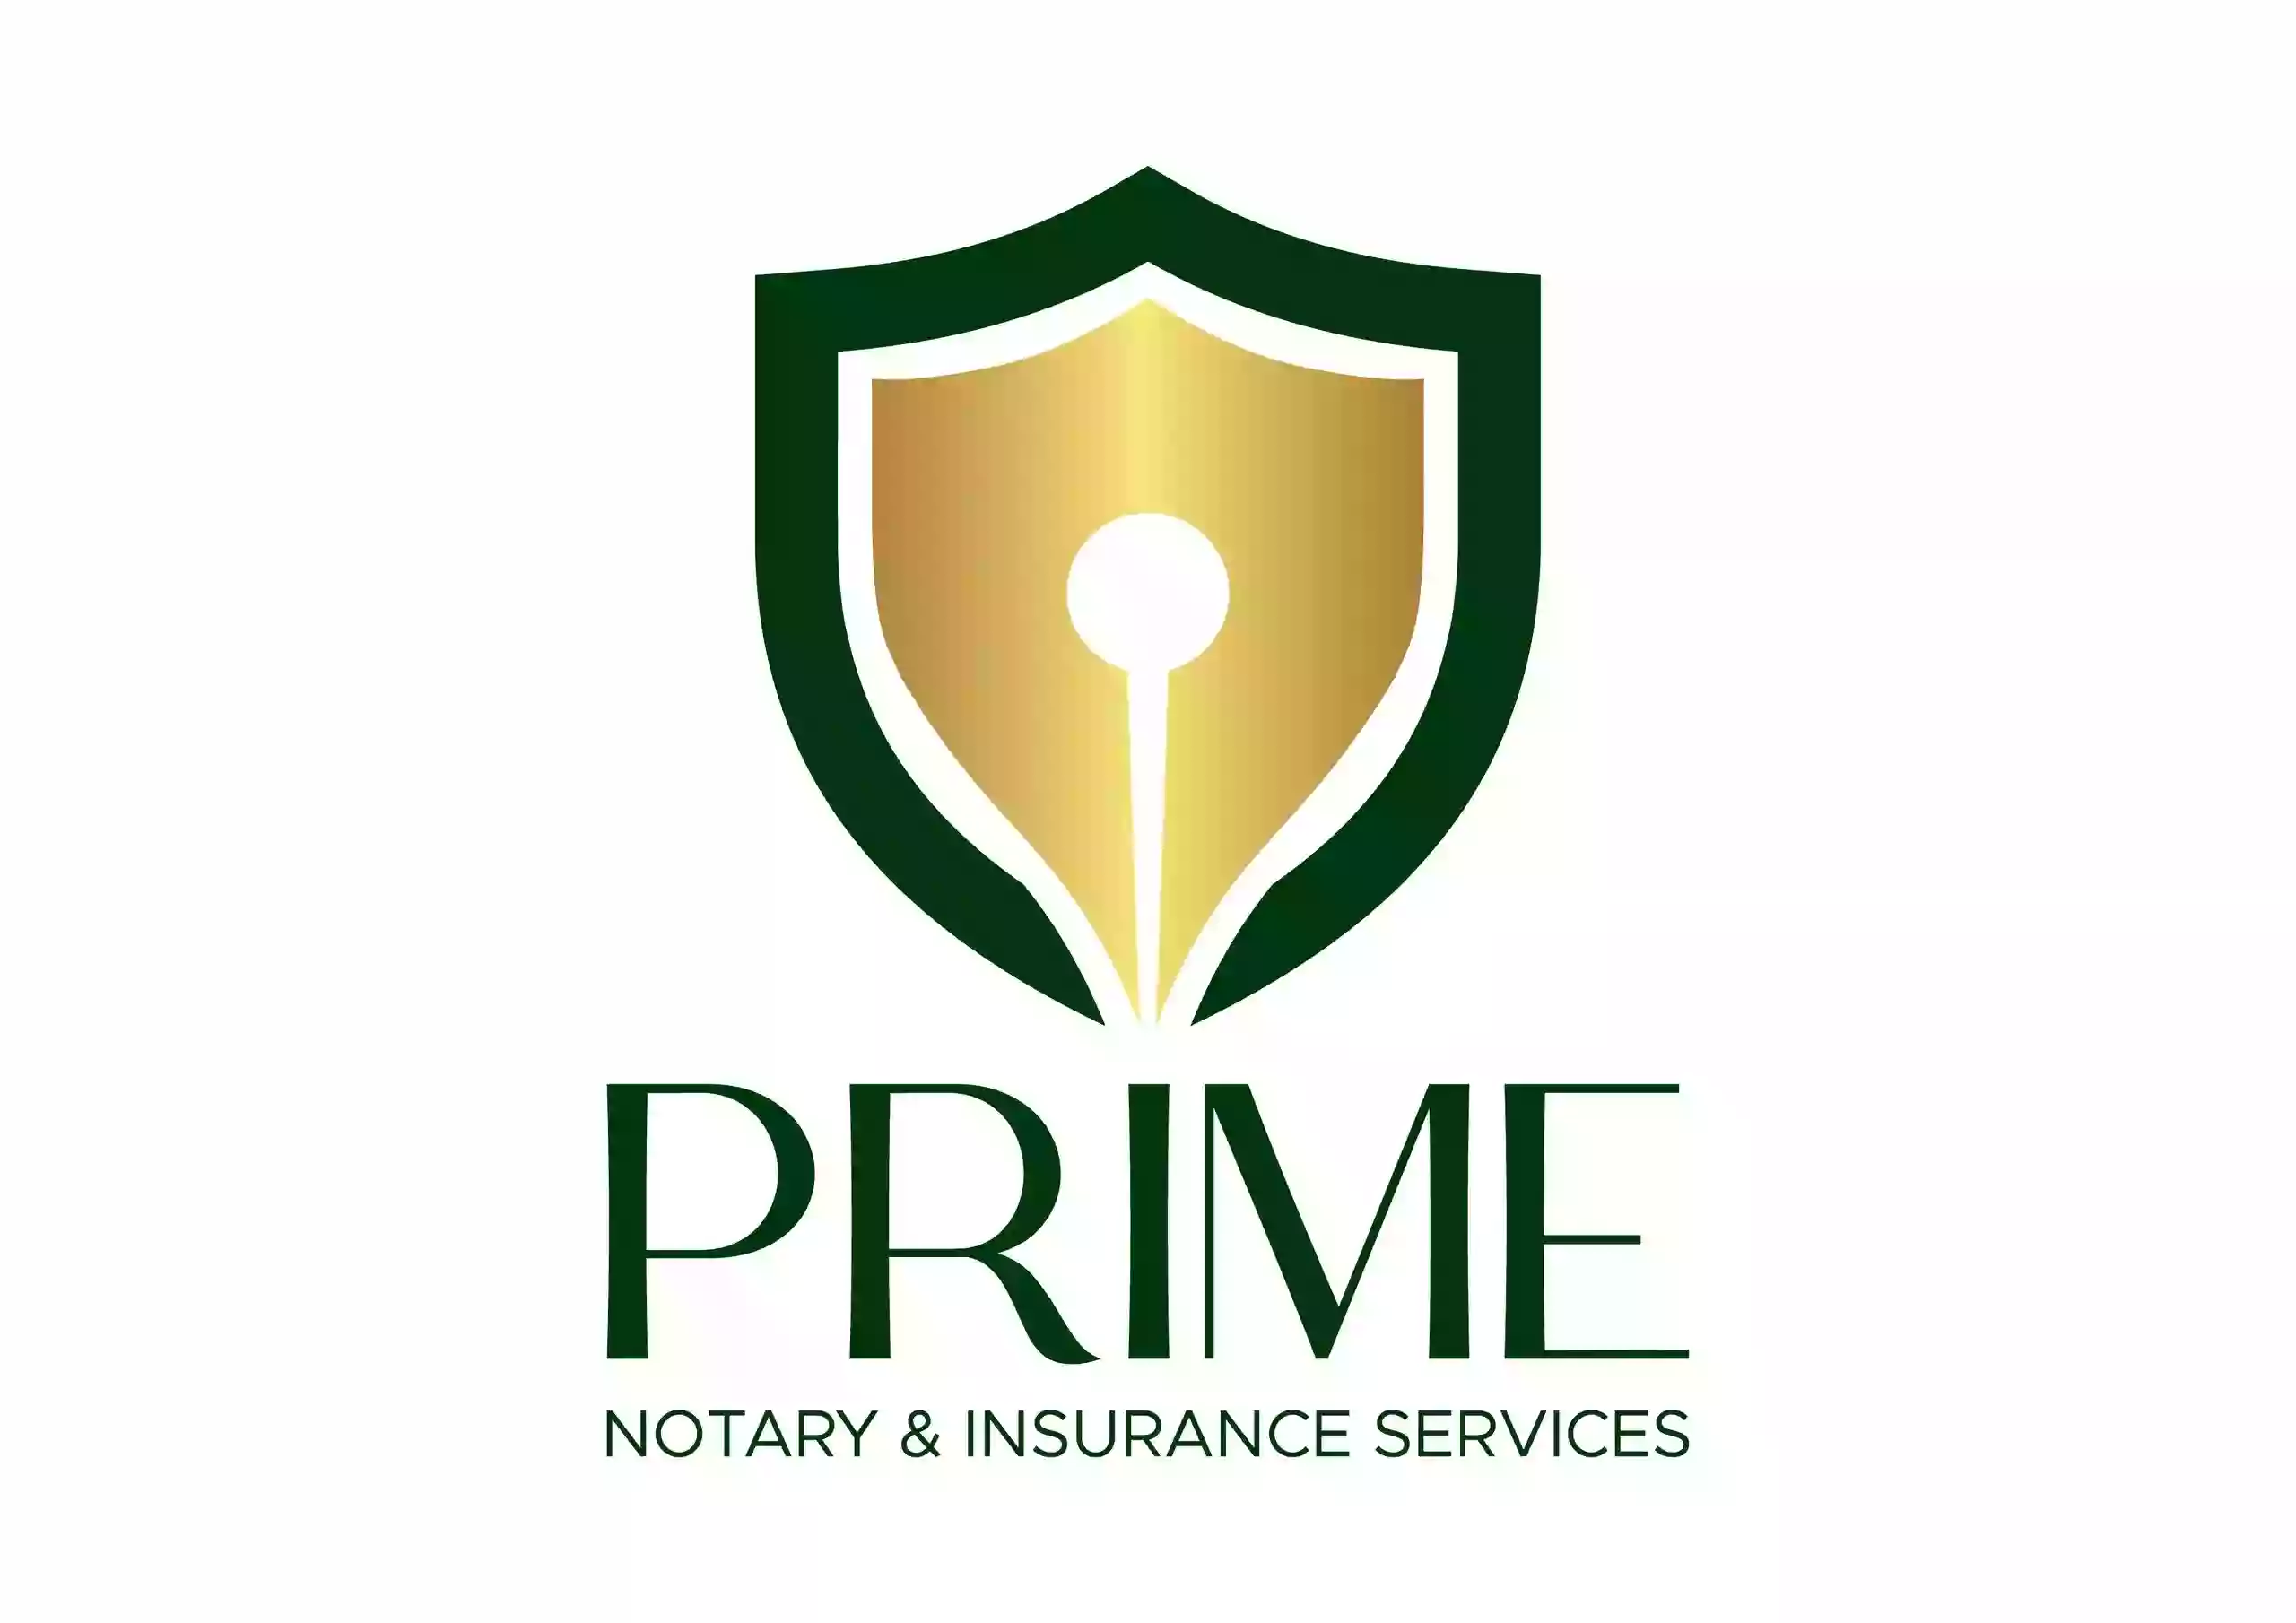 Prime Notary & Insurance Services